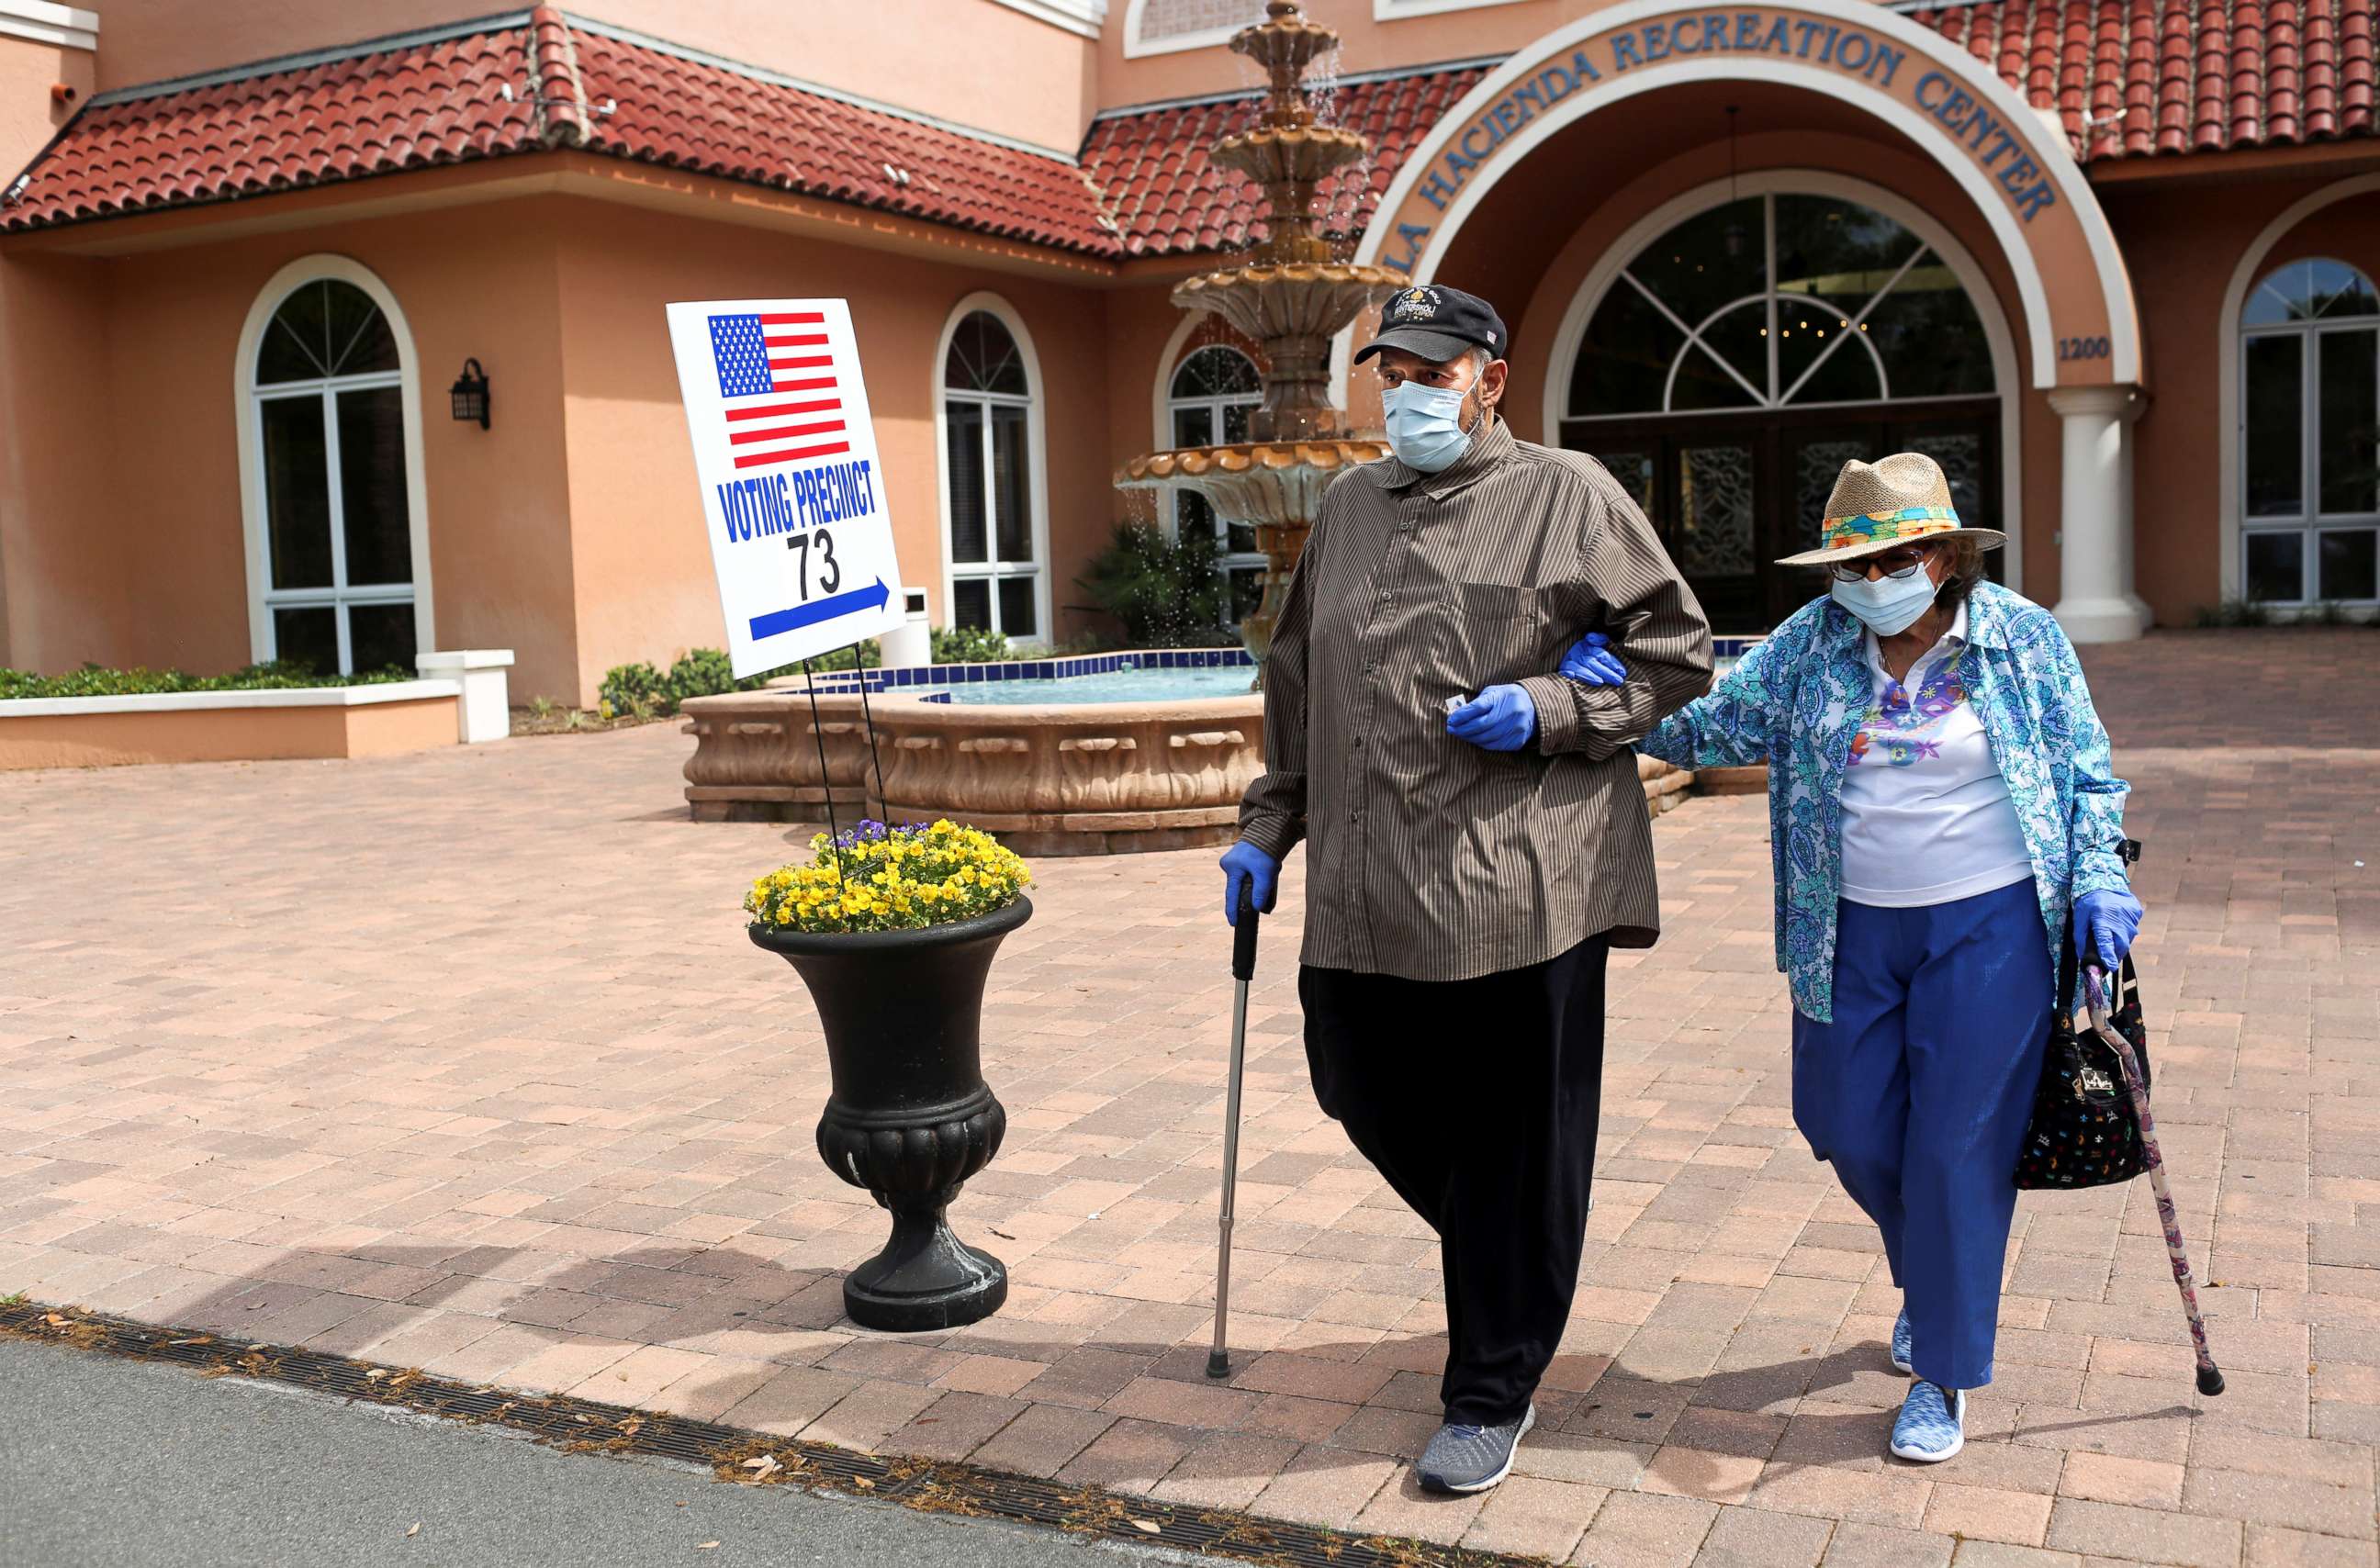 PHOTO: Rick Hatfield, 73, walks with his mother, Marie Rossi, 93, in face masks to protect themselves from coronavirus, out of La Hacienda Recreation Center, as voters cast their ballots in the Democratic primary in The Villages, Fla., March 17, 2020.